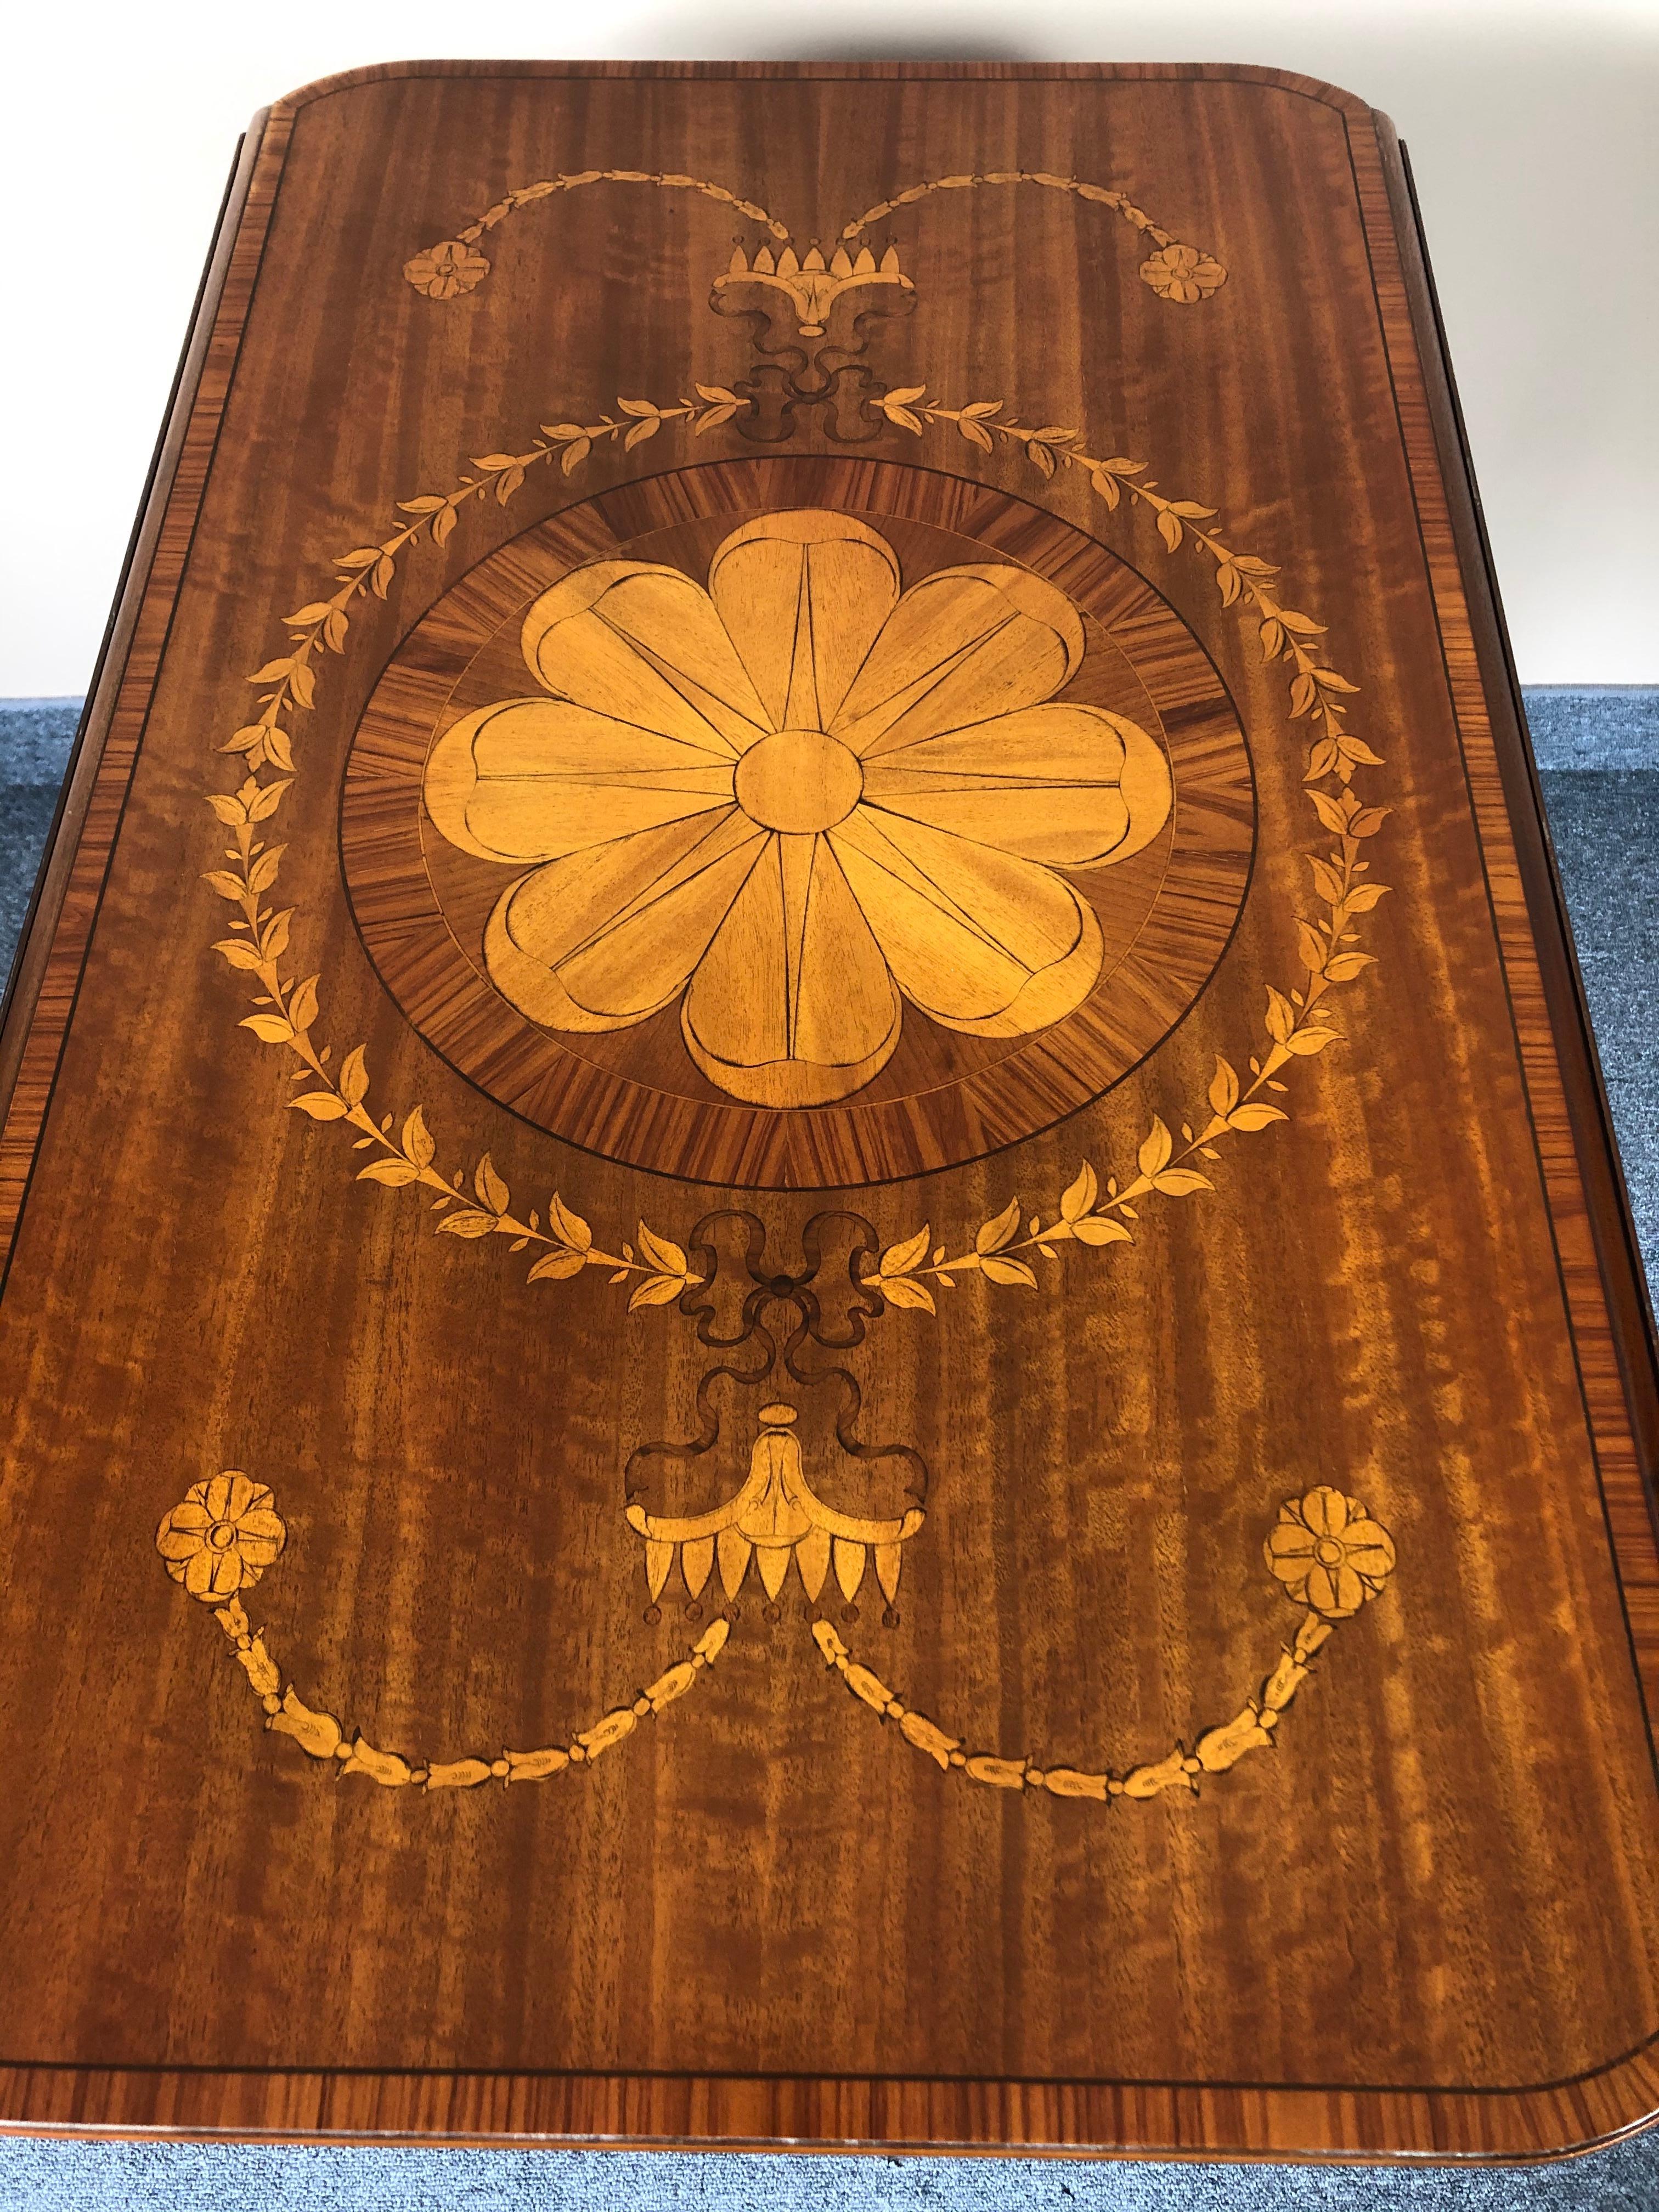 A beautiful dropleaf or Pembroke table having mixed wood inlay including central flower mandala, single drawer, and pretty tapered legs, also adorned with inlay.
When open 37.25 W